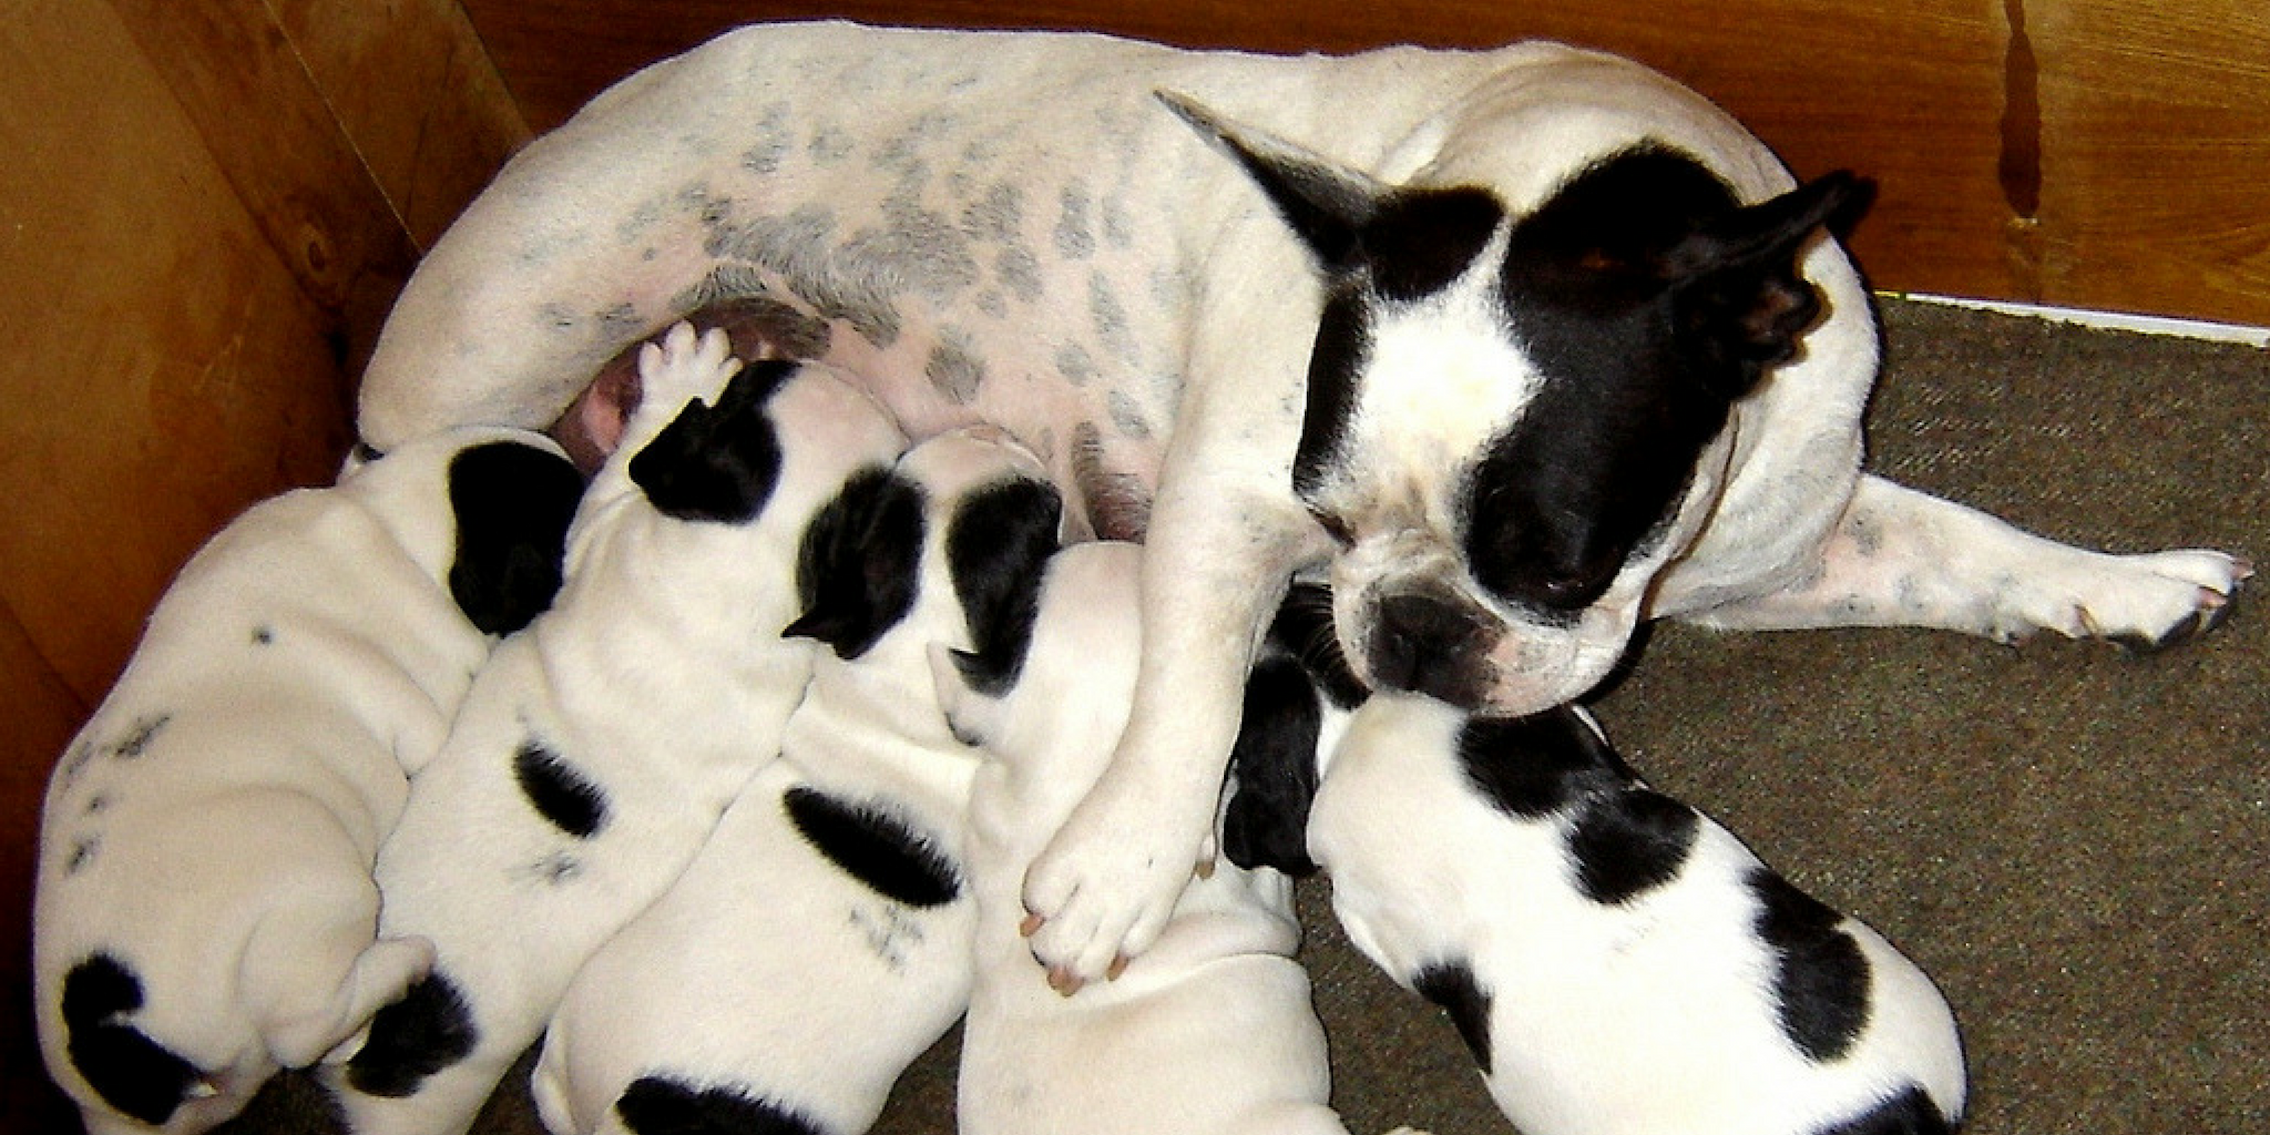 A littler of French bulldog puppies with their mother